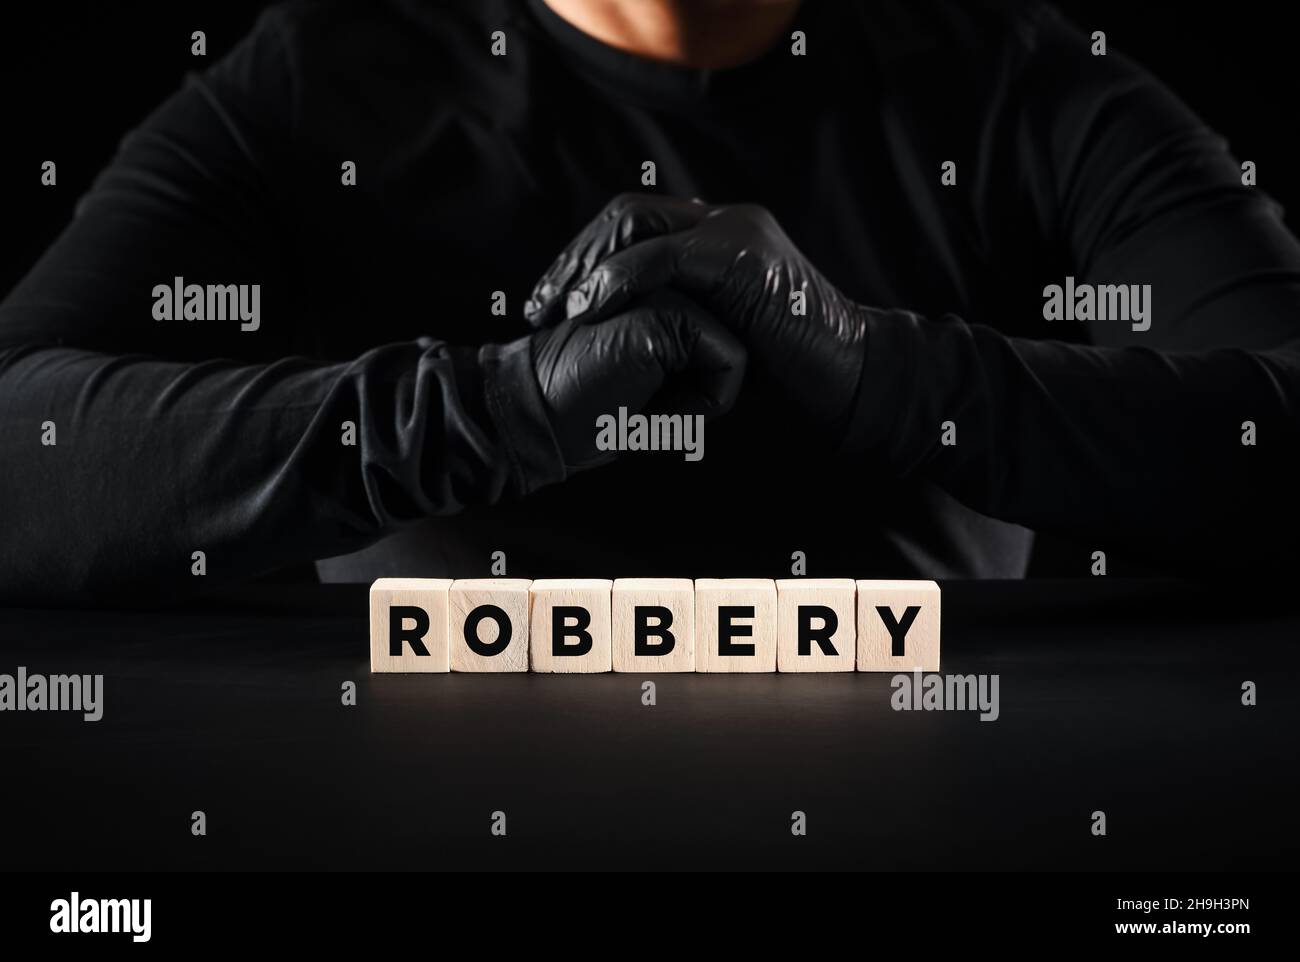 Theft, crime, robbery or burglary concept. The word robbery written on wooden blocks with a thief with black gloves background. Stock Photo